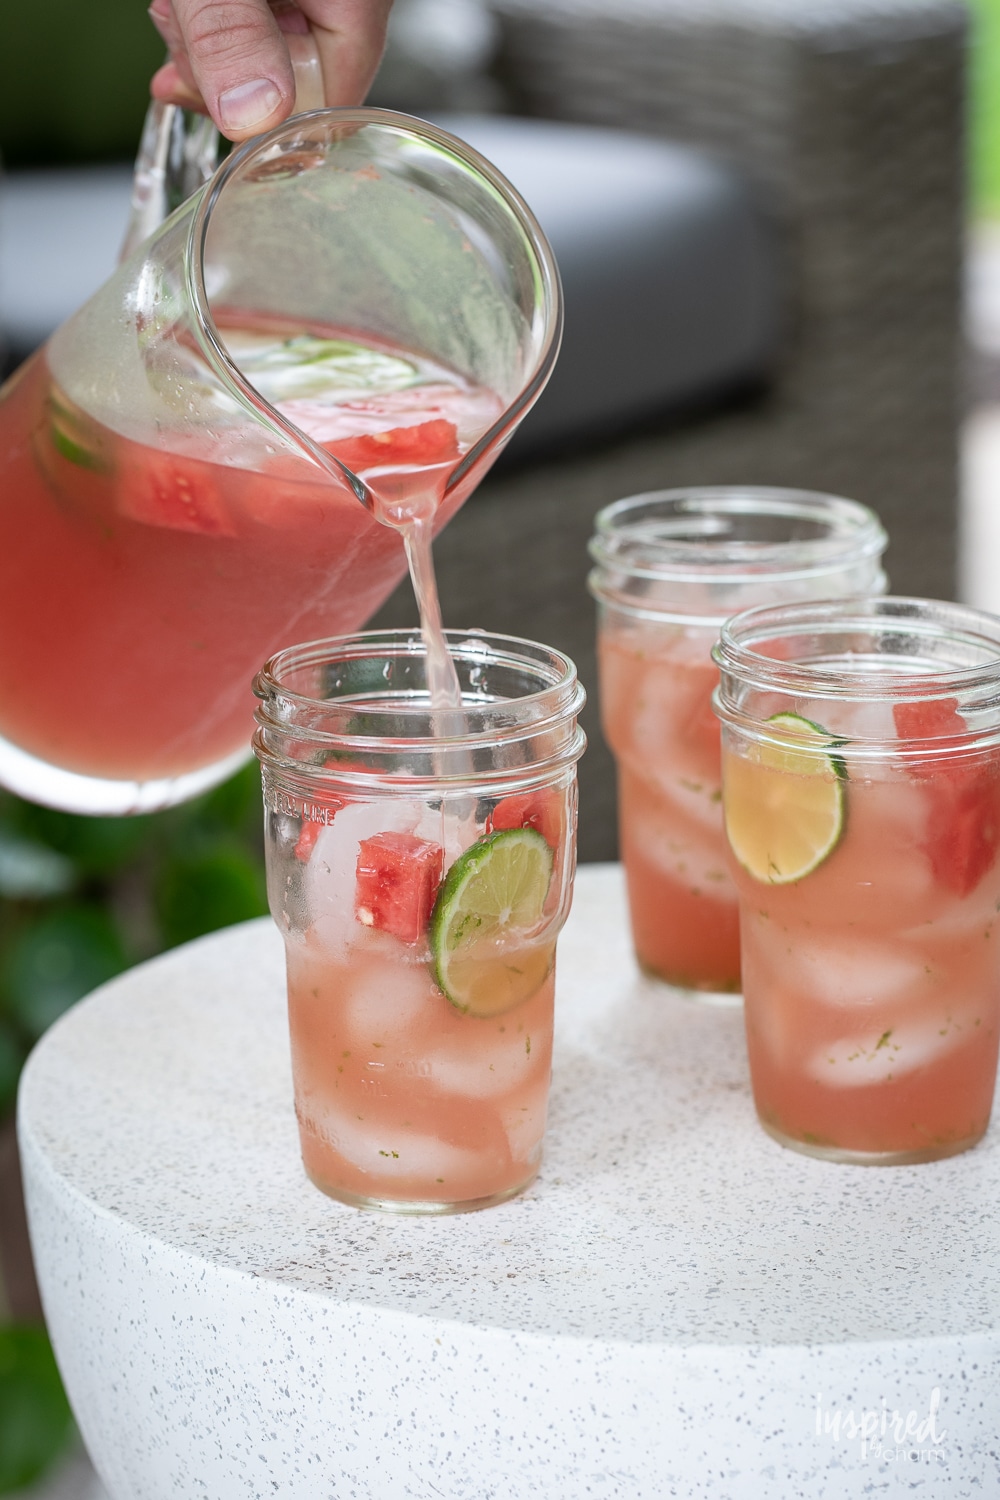 pour watermelon sangria from a pitcher into glasses filled with ice.